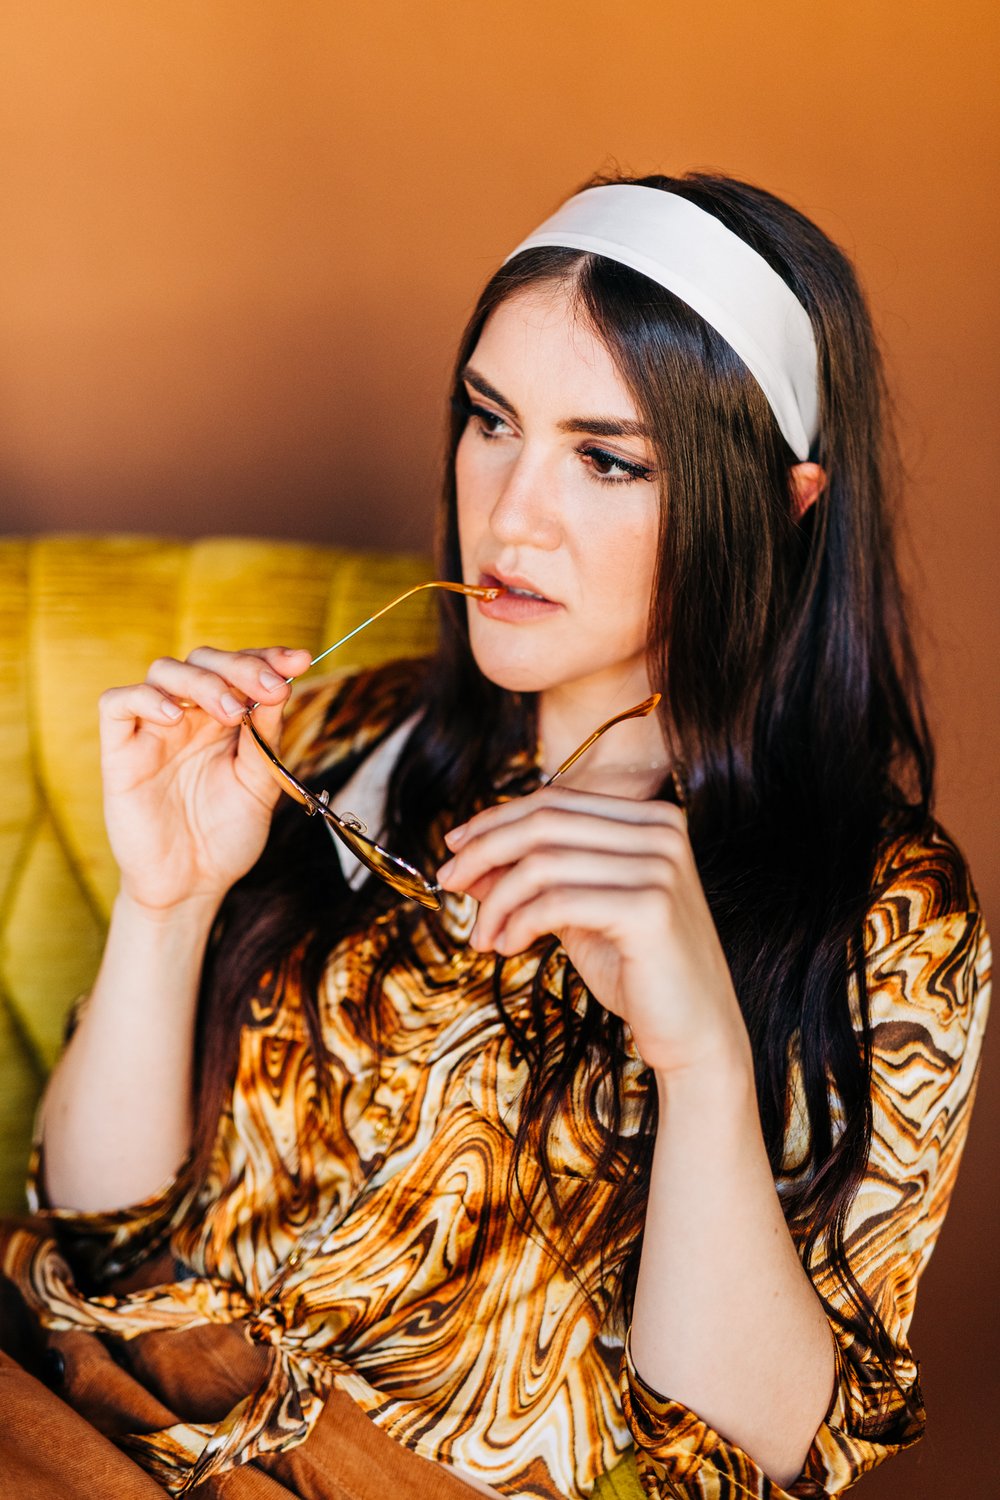 70s inspired creative editorial photoshoot at the suite on federal in downtown youngstown ohio photographed by youngstown wedding photographer mae b photo youngstown family photographer mae b photo-14.jpg